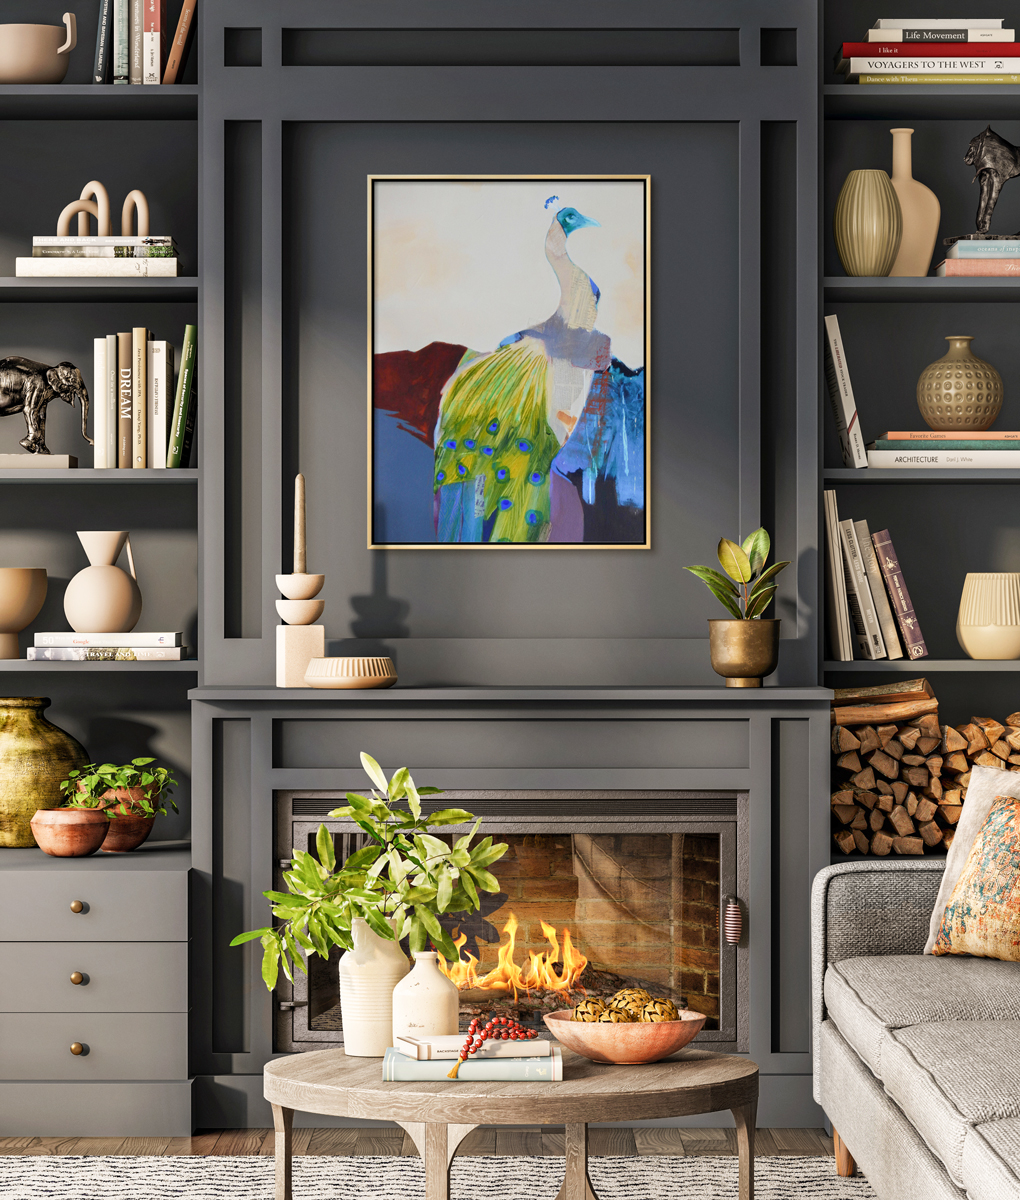 Living room with black walls and a peacock painting hung over the fireplace